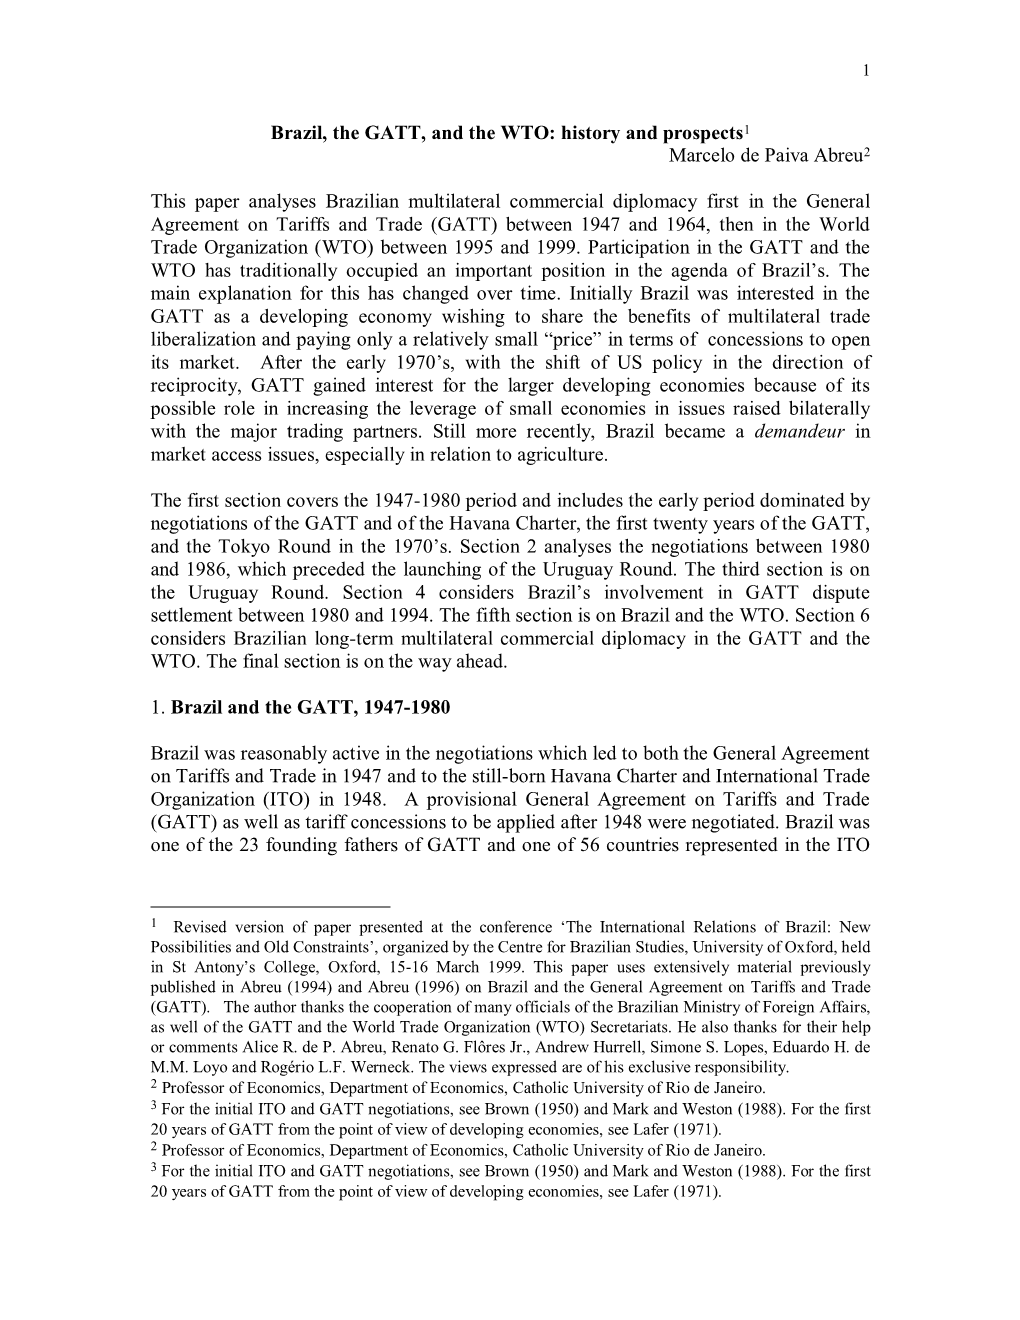 Brazil, the GATT, and the WTO: History and Prospects1 Marcelo De Paiva Abreu2